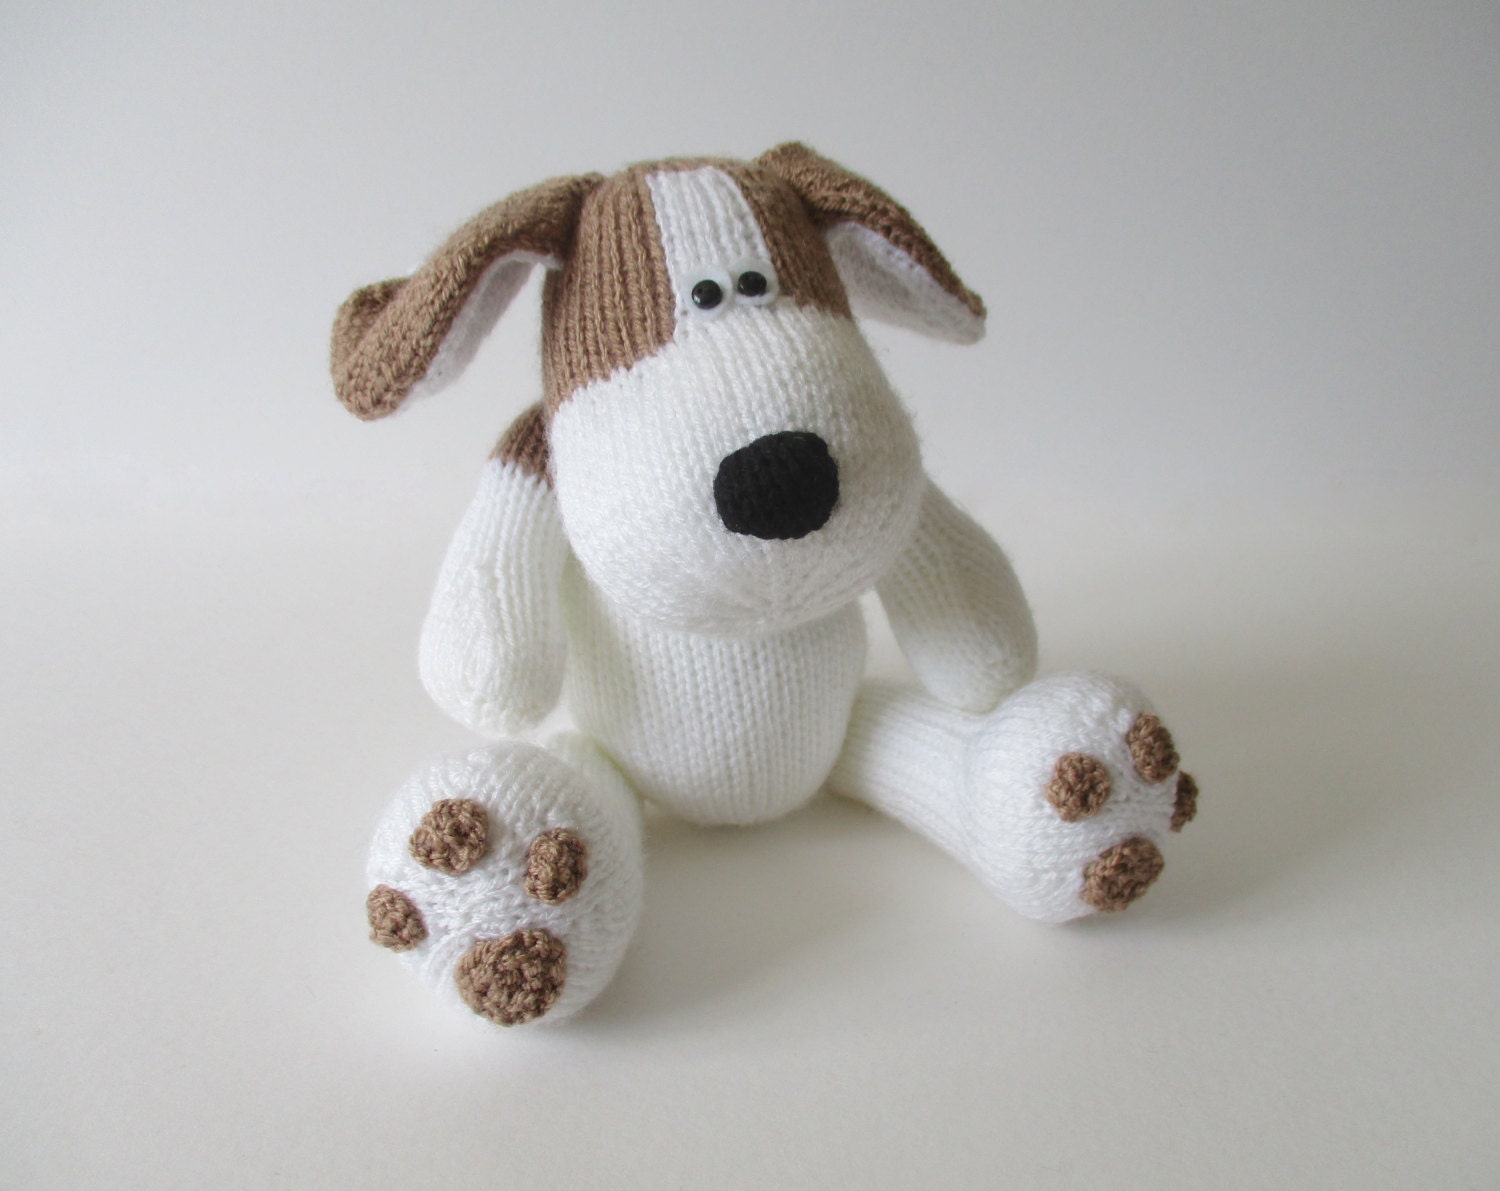 Spot the Puppy toy knitting patterns